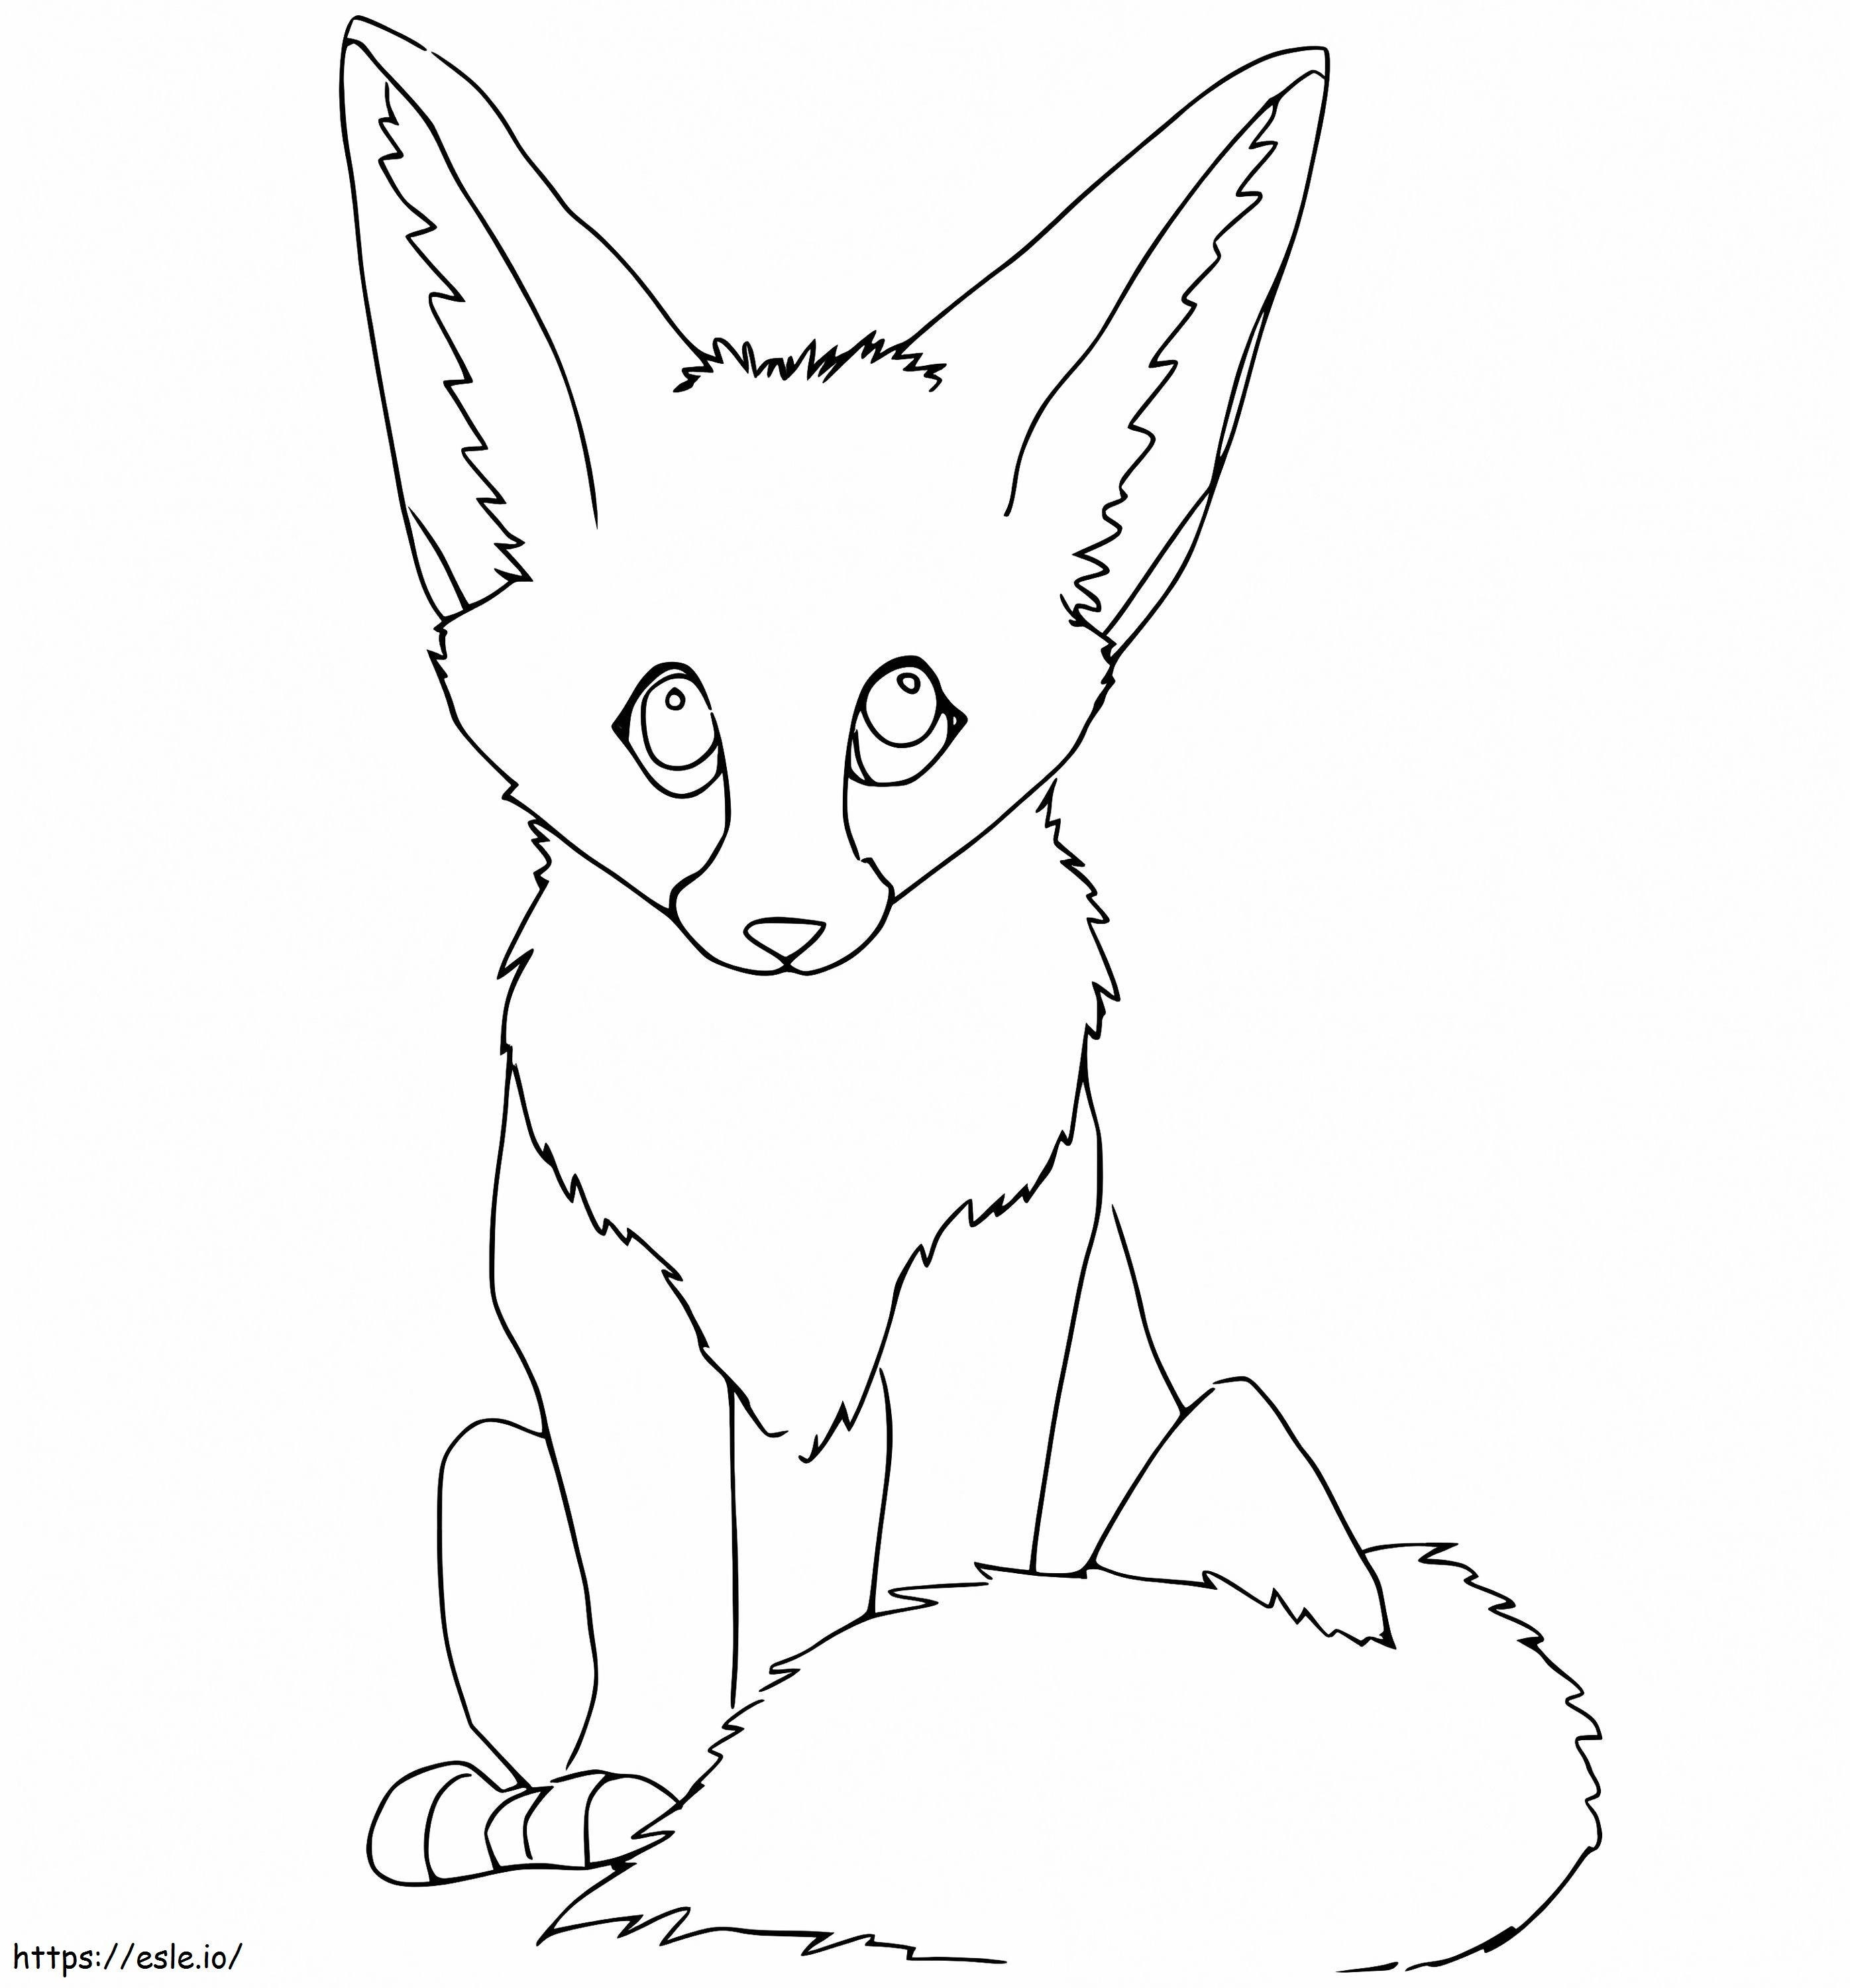 Fennec Fox Looks Cute coloring page